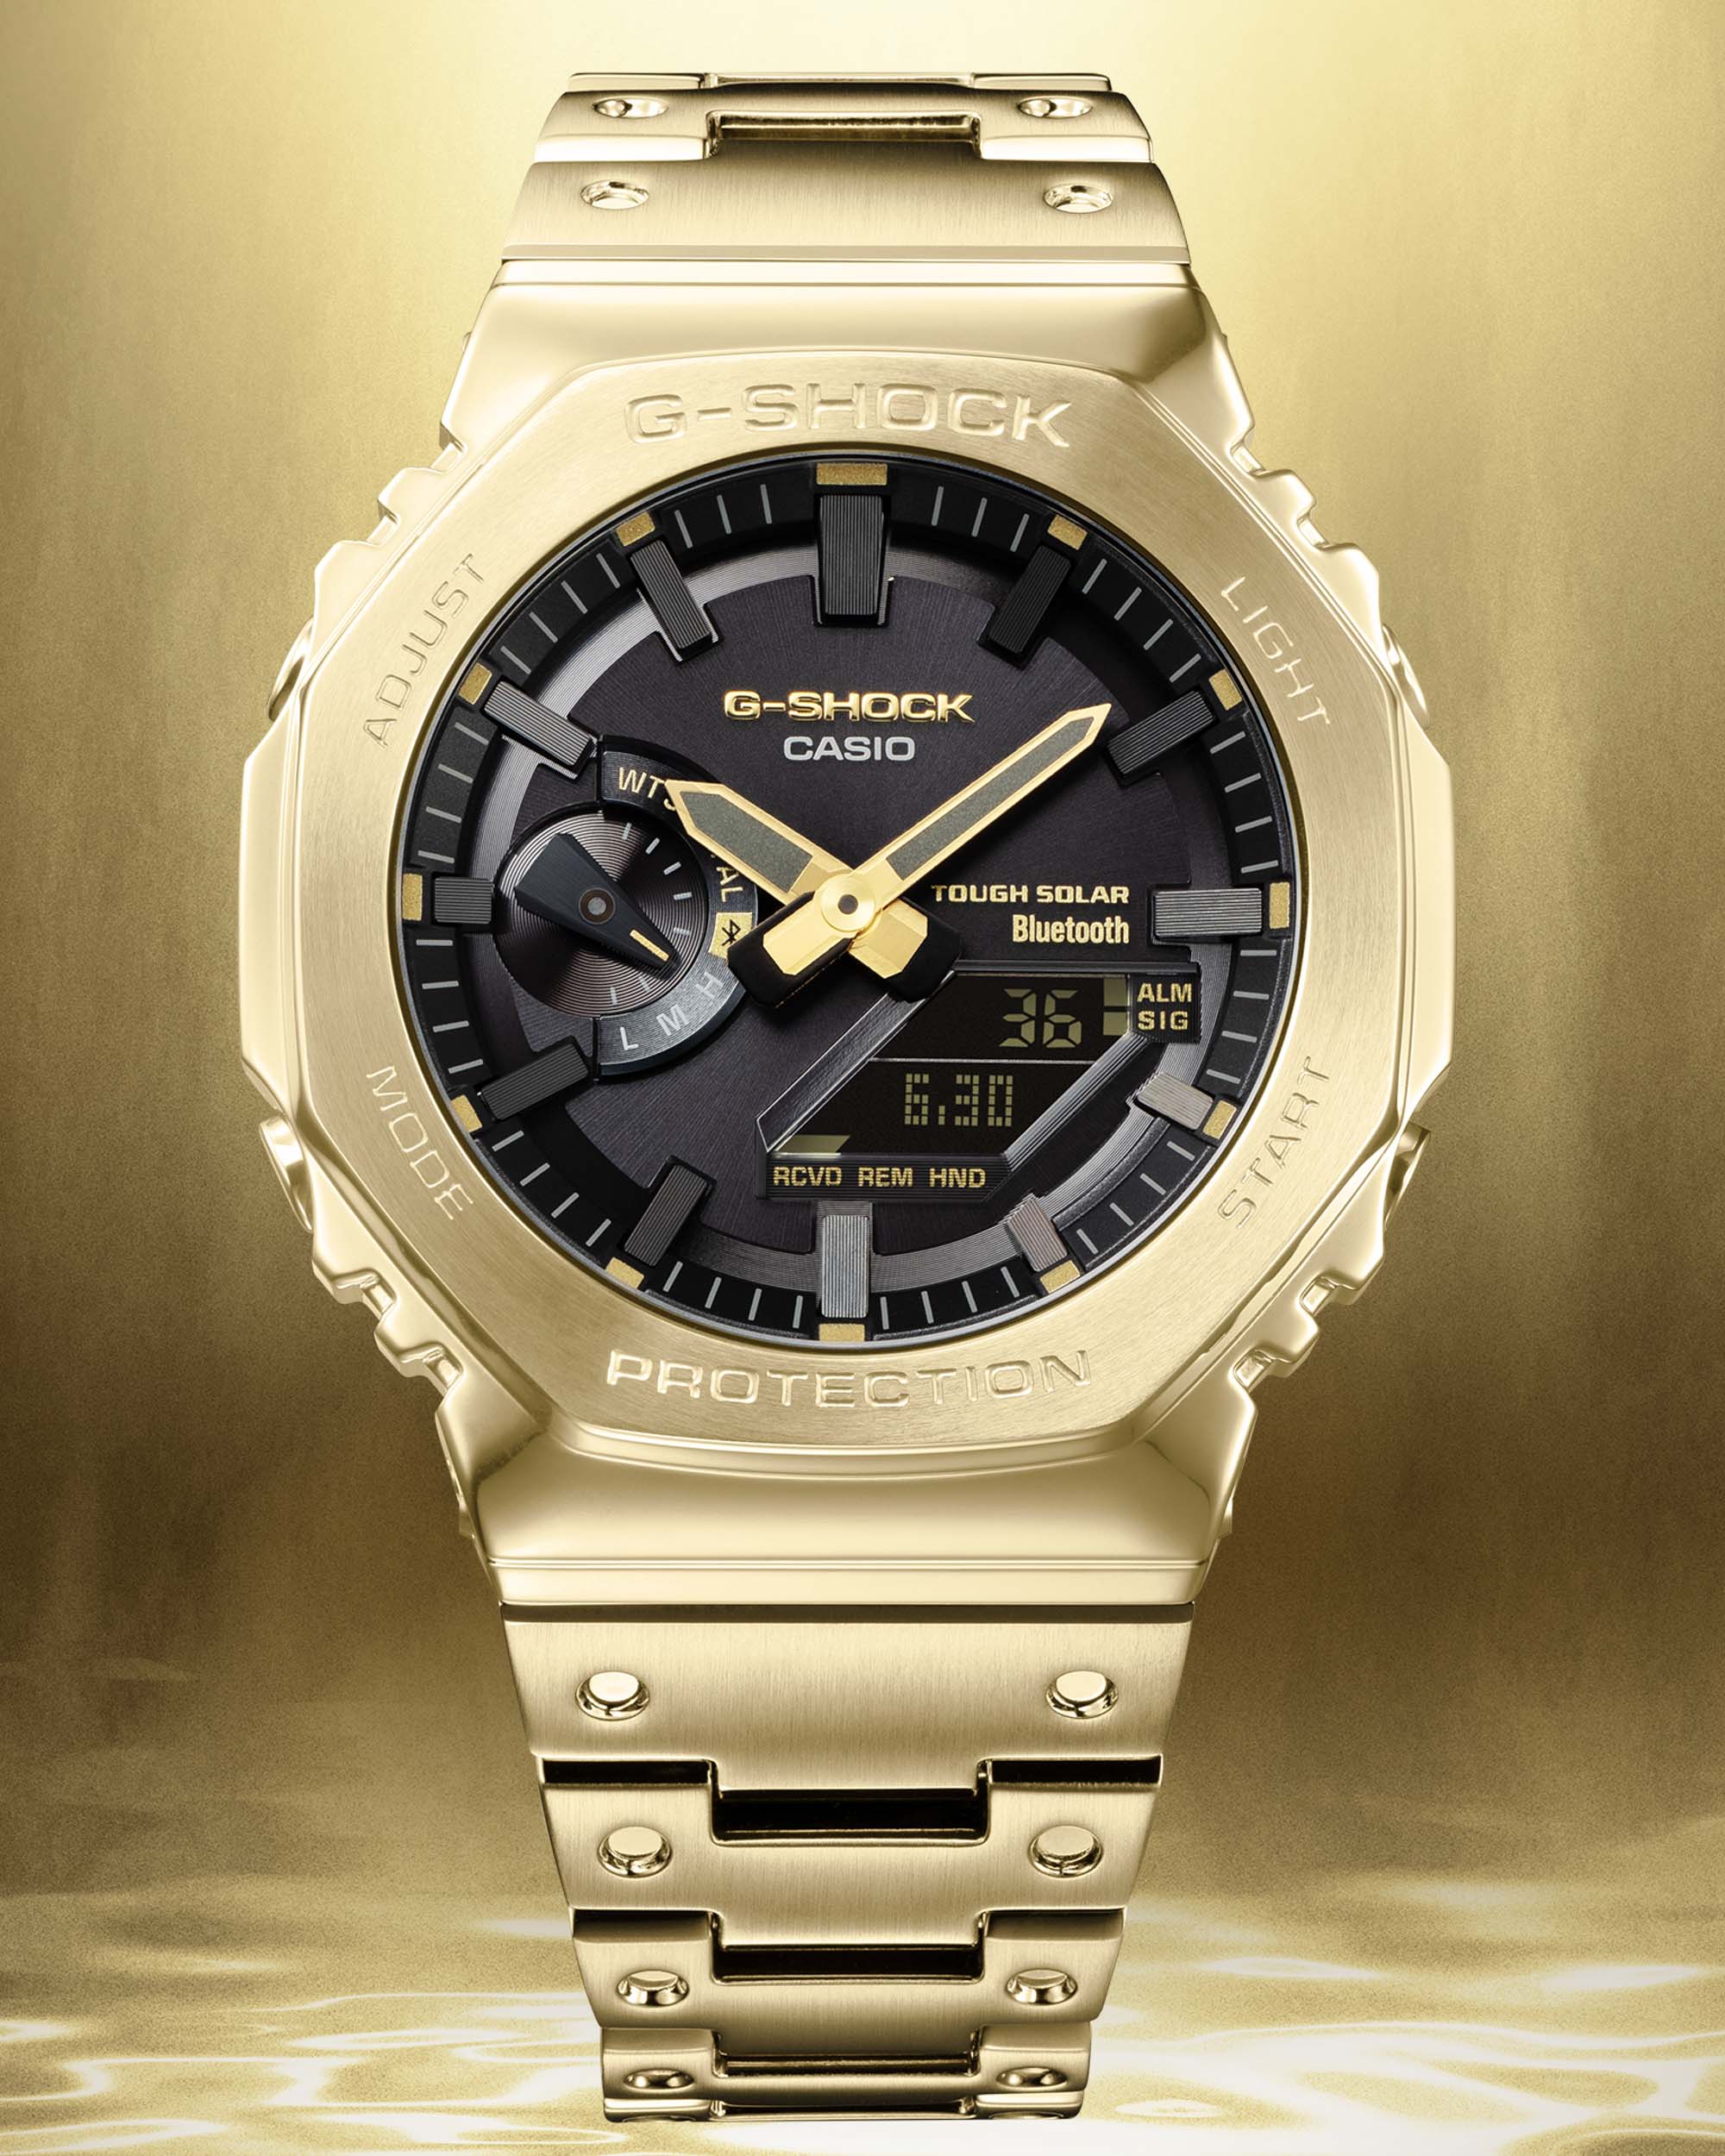 Proportional pave melodi First Look: G-Shock Expands Its All-Gold Line With The GMB2100GD-9A Watch |  aBlogtoWatch